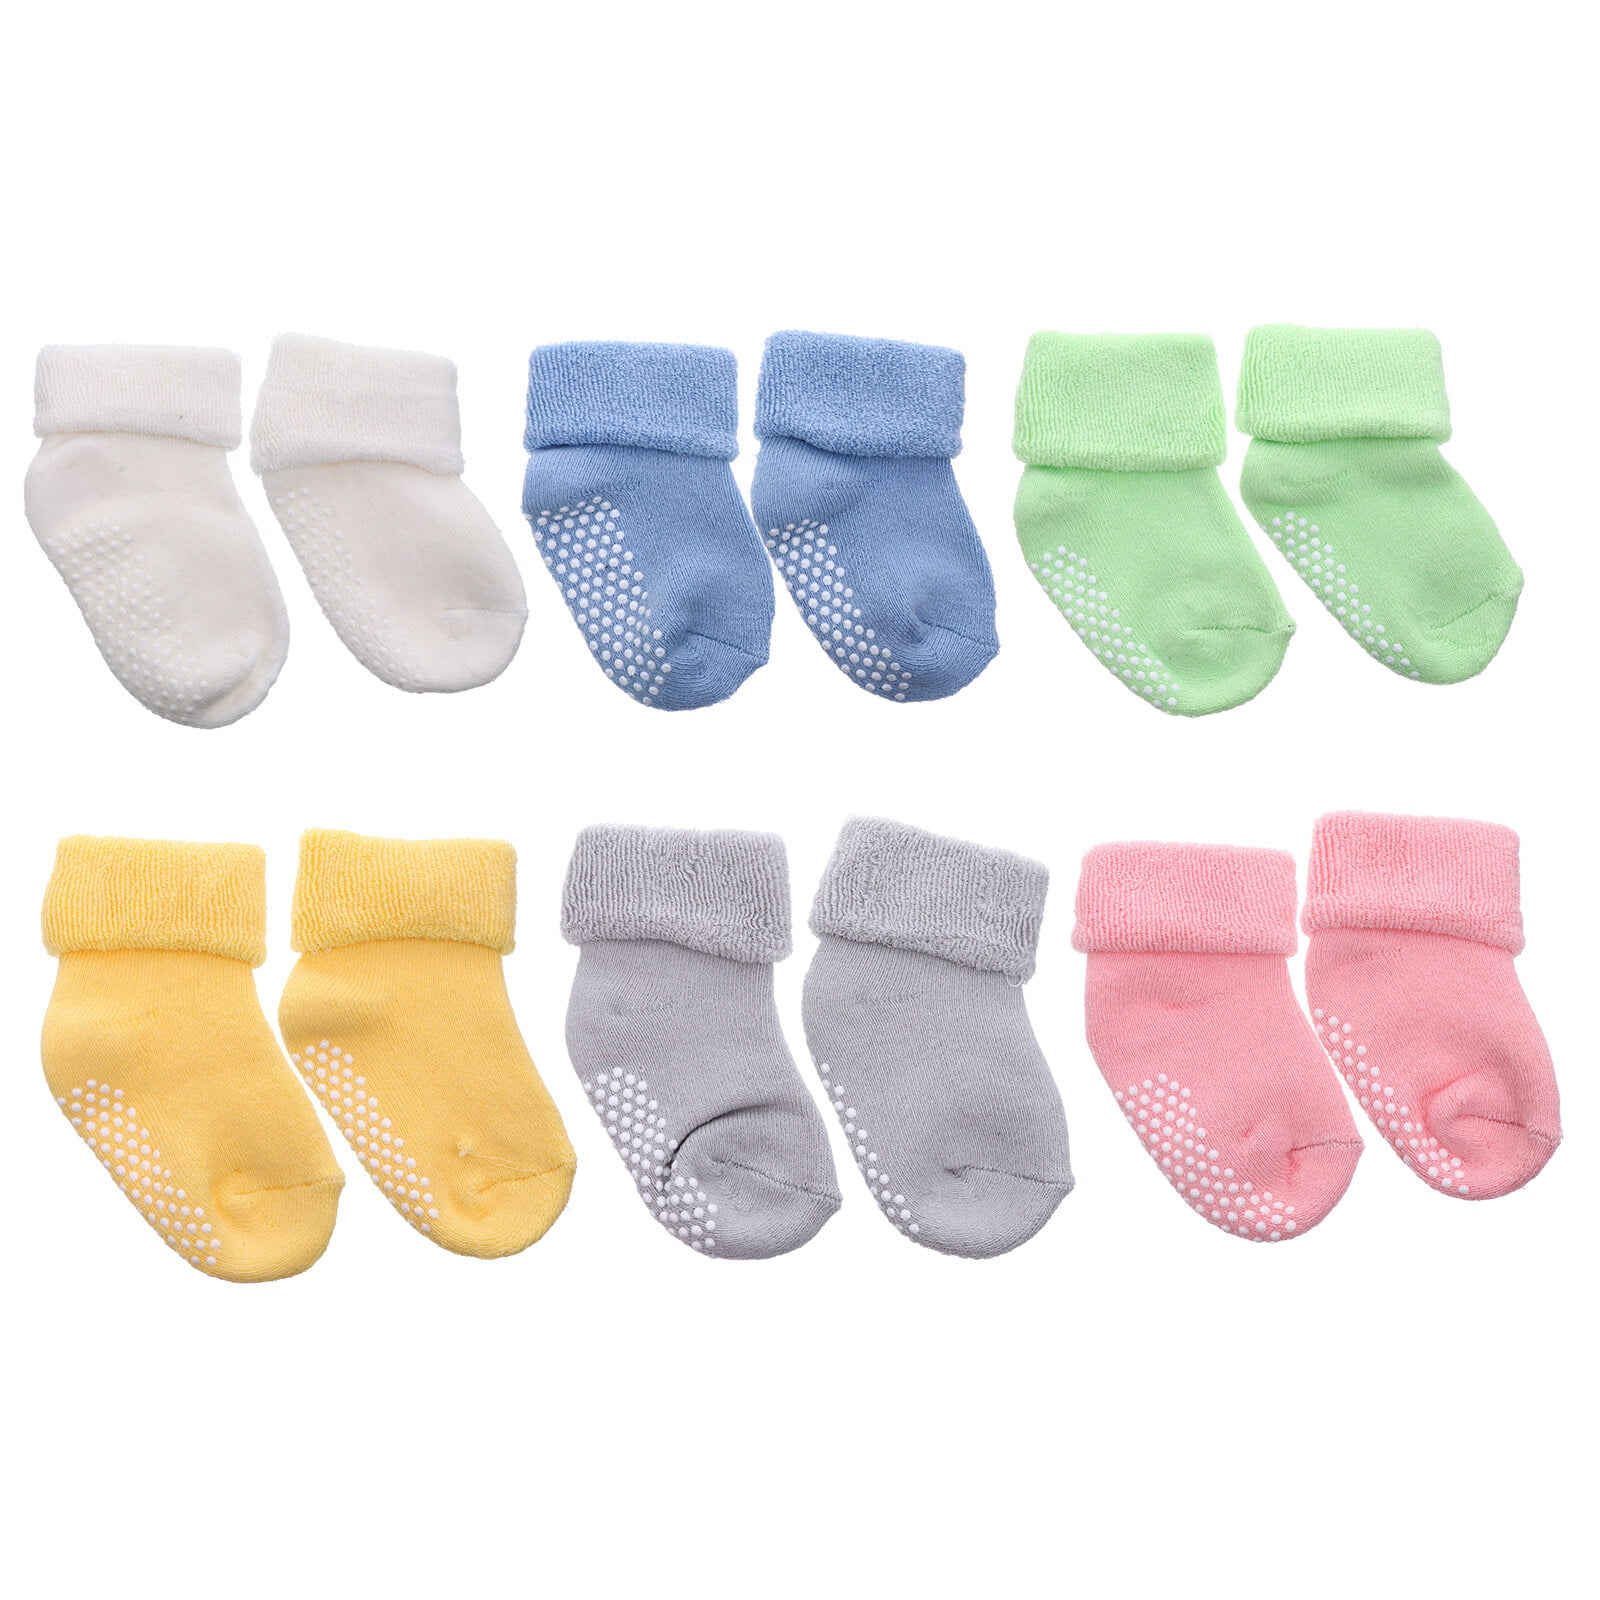 Baby Socks, 6 Pairs of Baby Thick Anti-skid Socks Infant Breathable ...